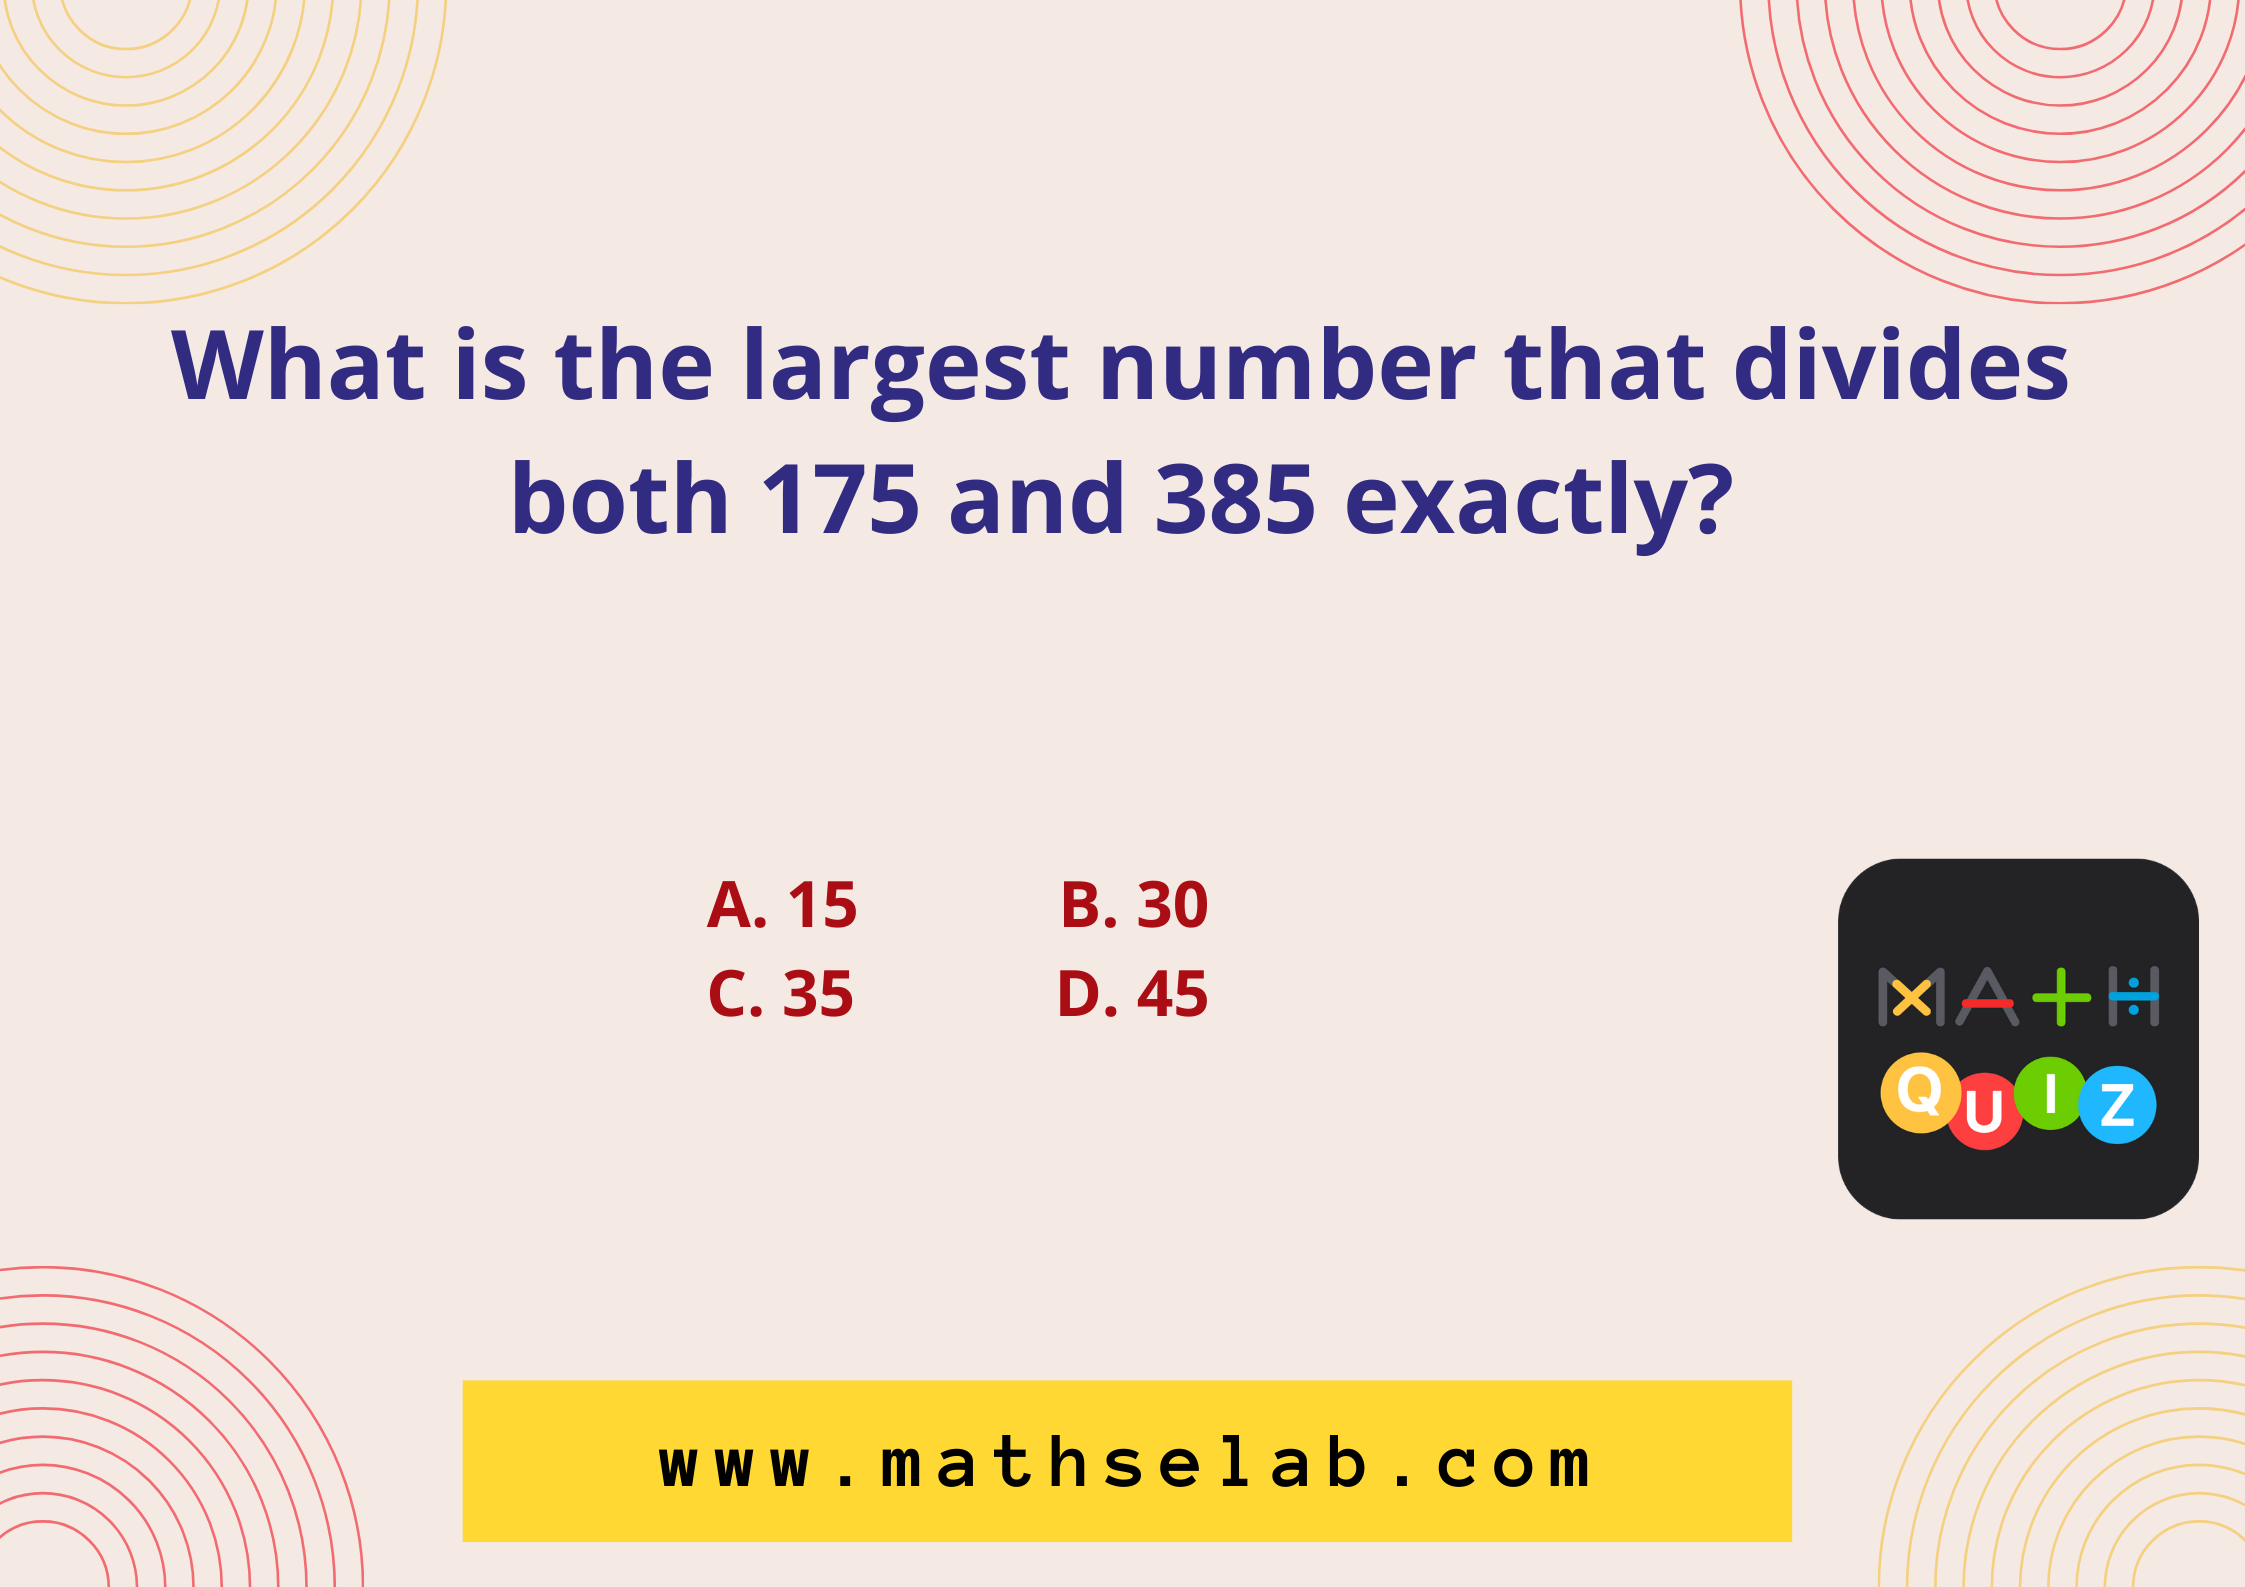 What is the largest number that divides both 175 and 385 exactly?